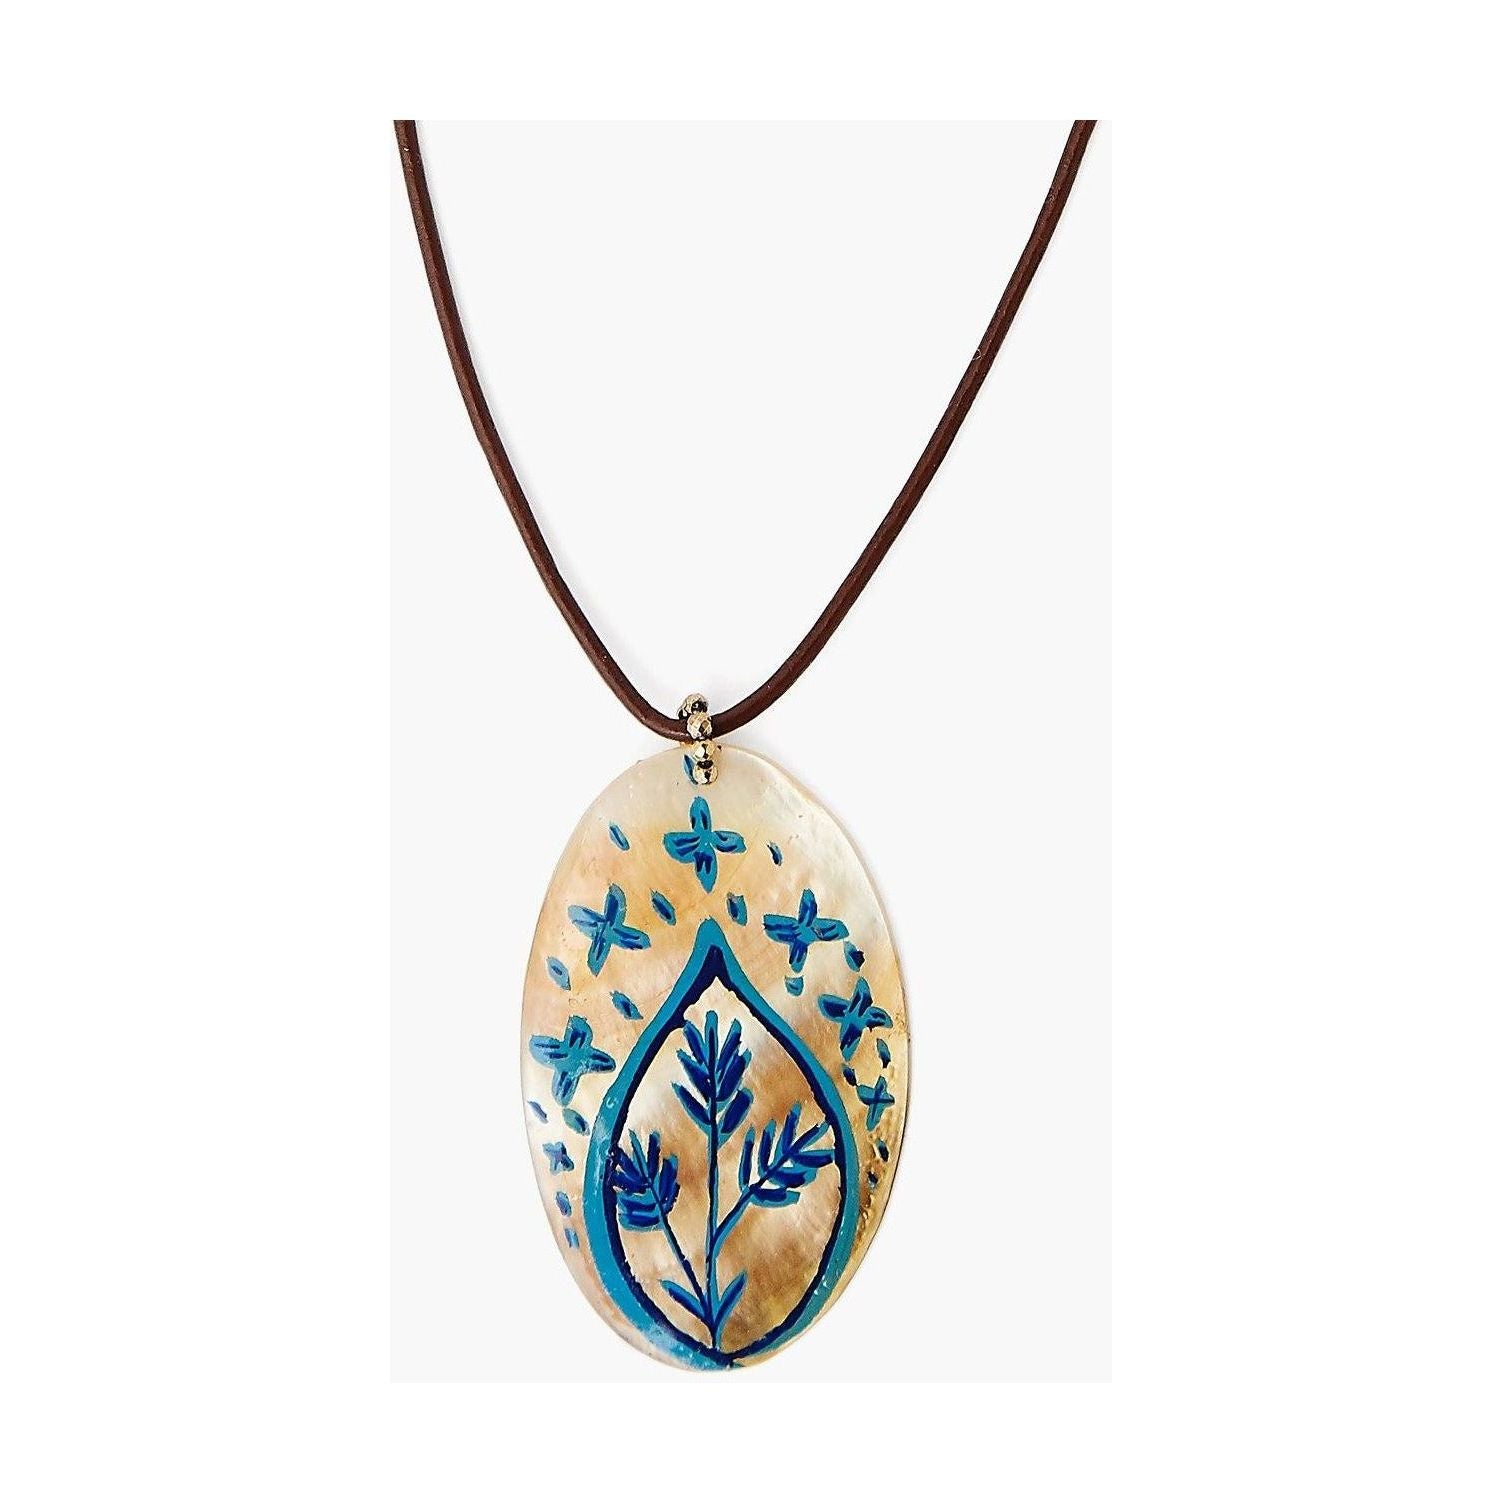 A Mother-Of-Pearl Circular Shell Pendant Inlaid With A Pattern Of Black  Bands And Abalone Shells